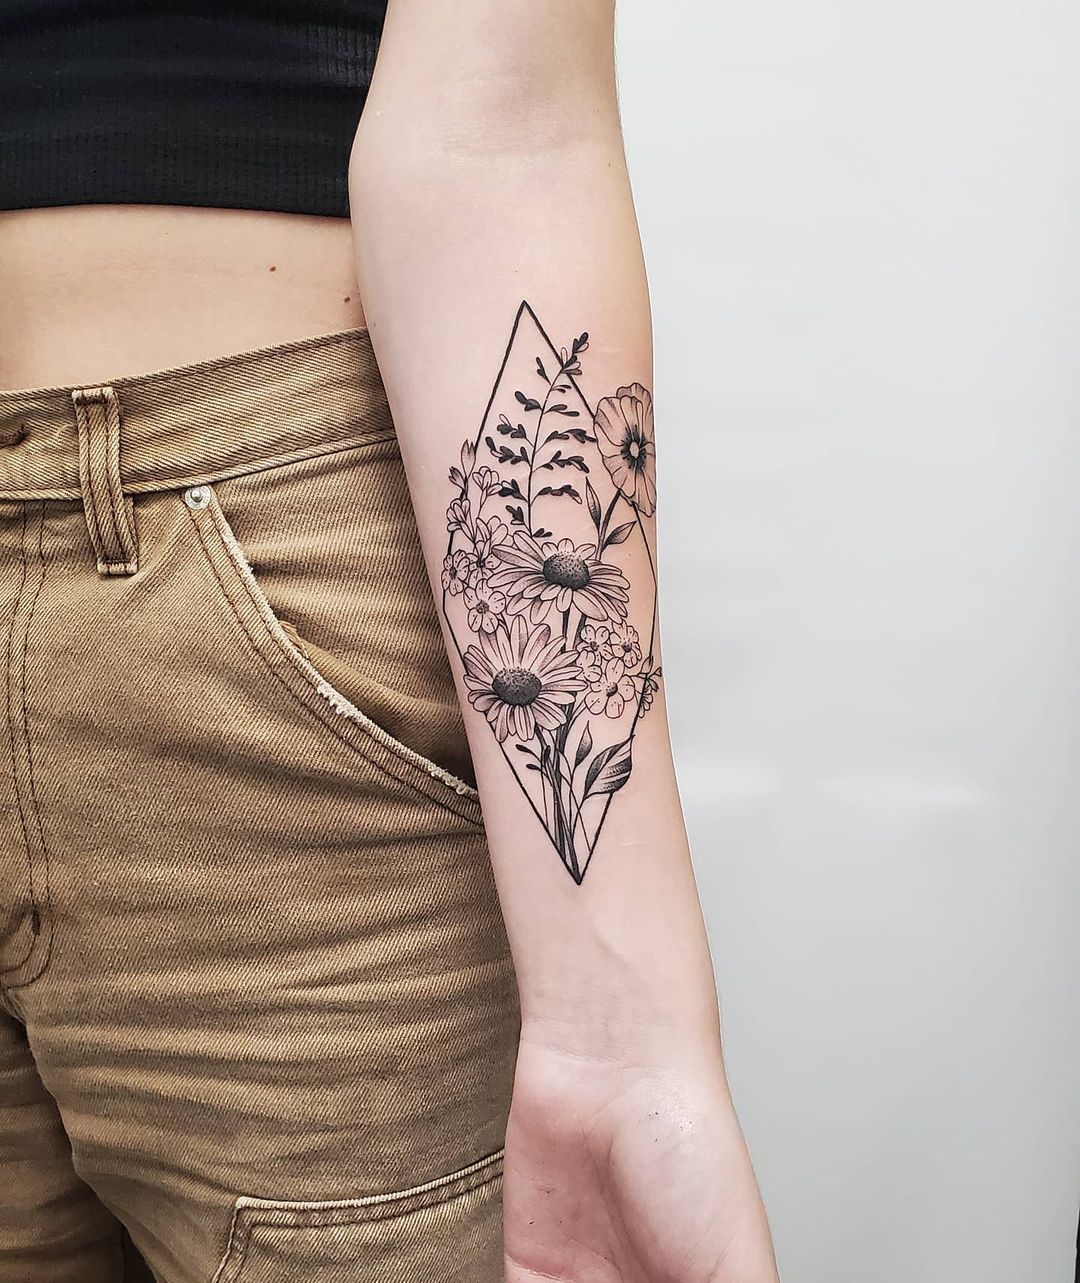 25 best first tattoo ideas and the least painful spots to get them